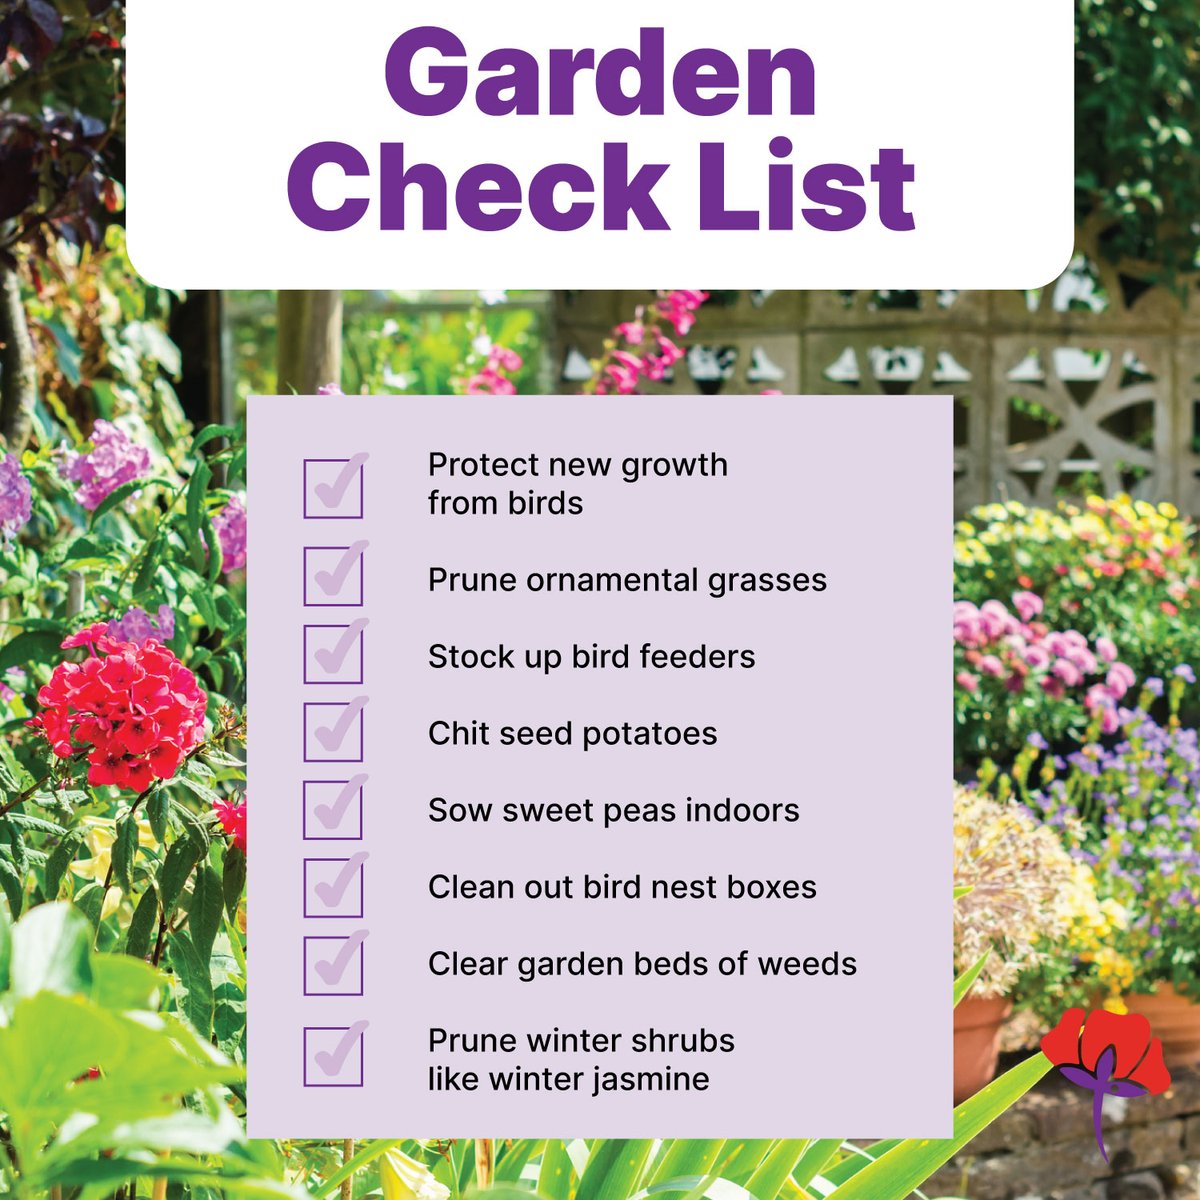 Get your garden ready for the upcoming season with these February garden tasks 👩‍🌾🌱 #GardenCheckList